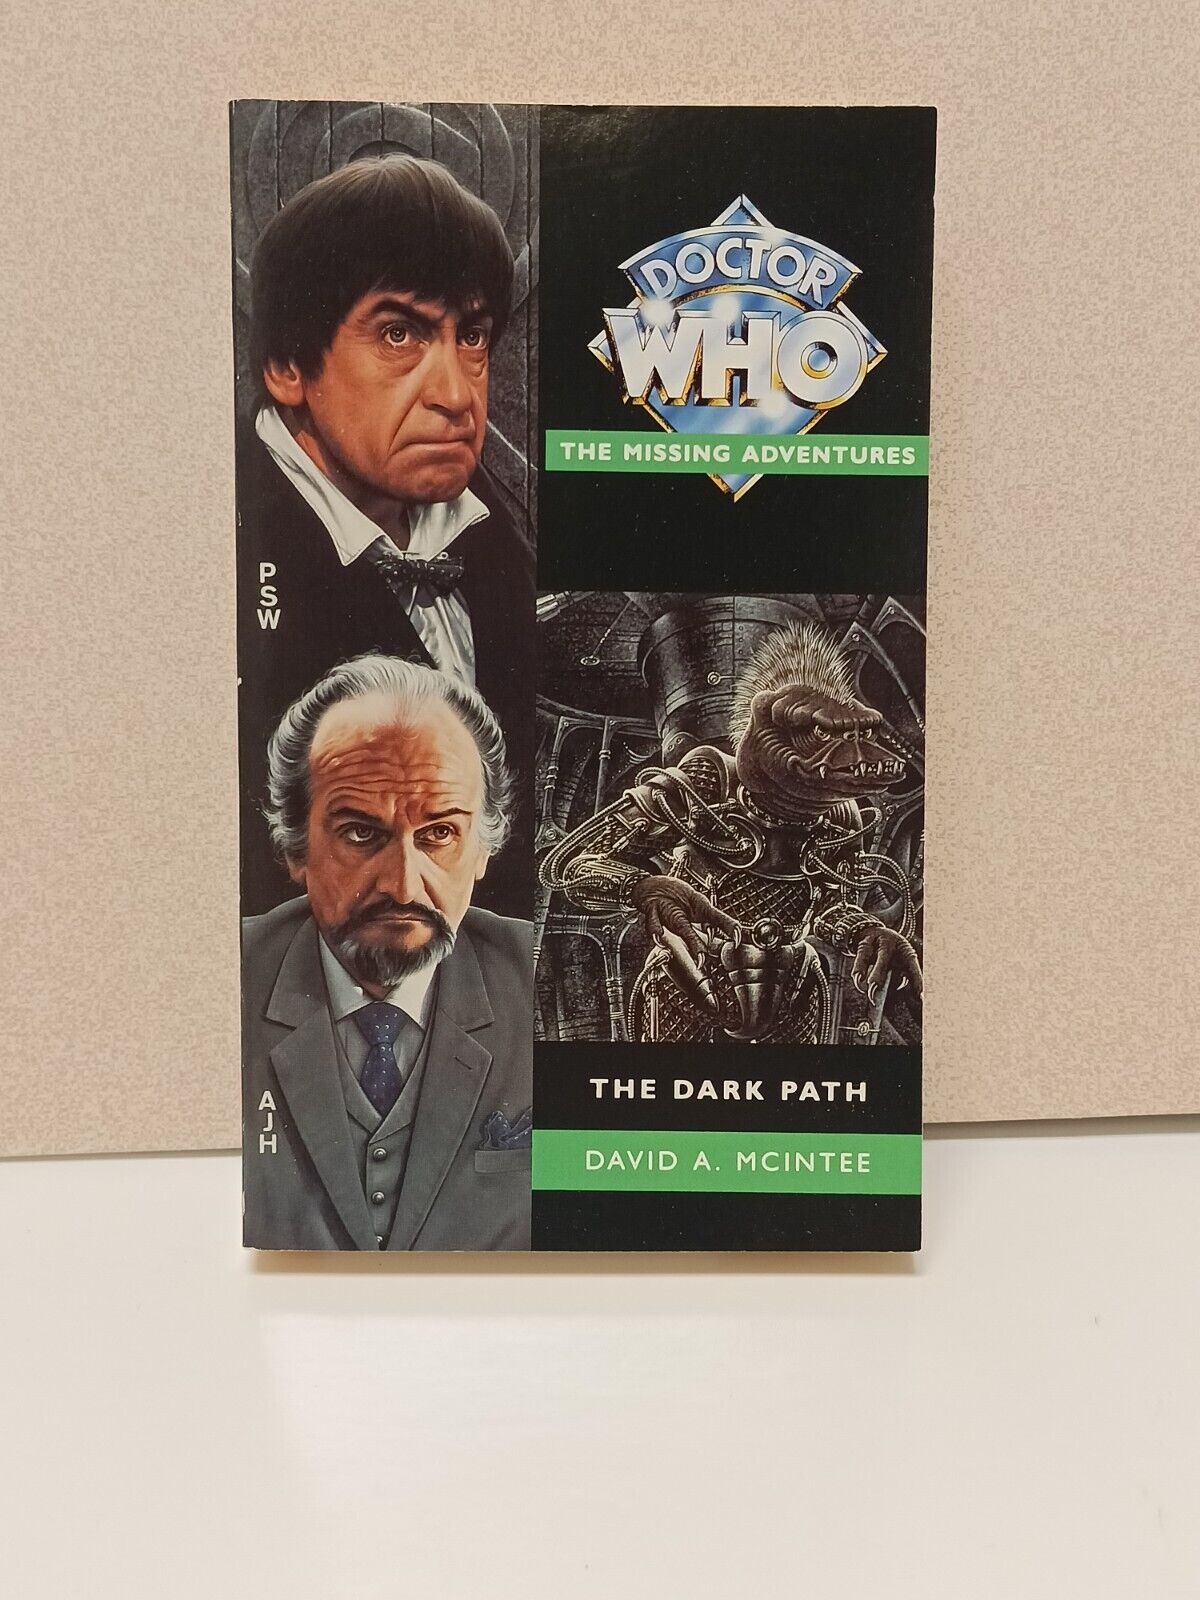 Doctor Who The Missing Adventures: The Dark Path by David McIntee VTG RARE